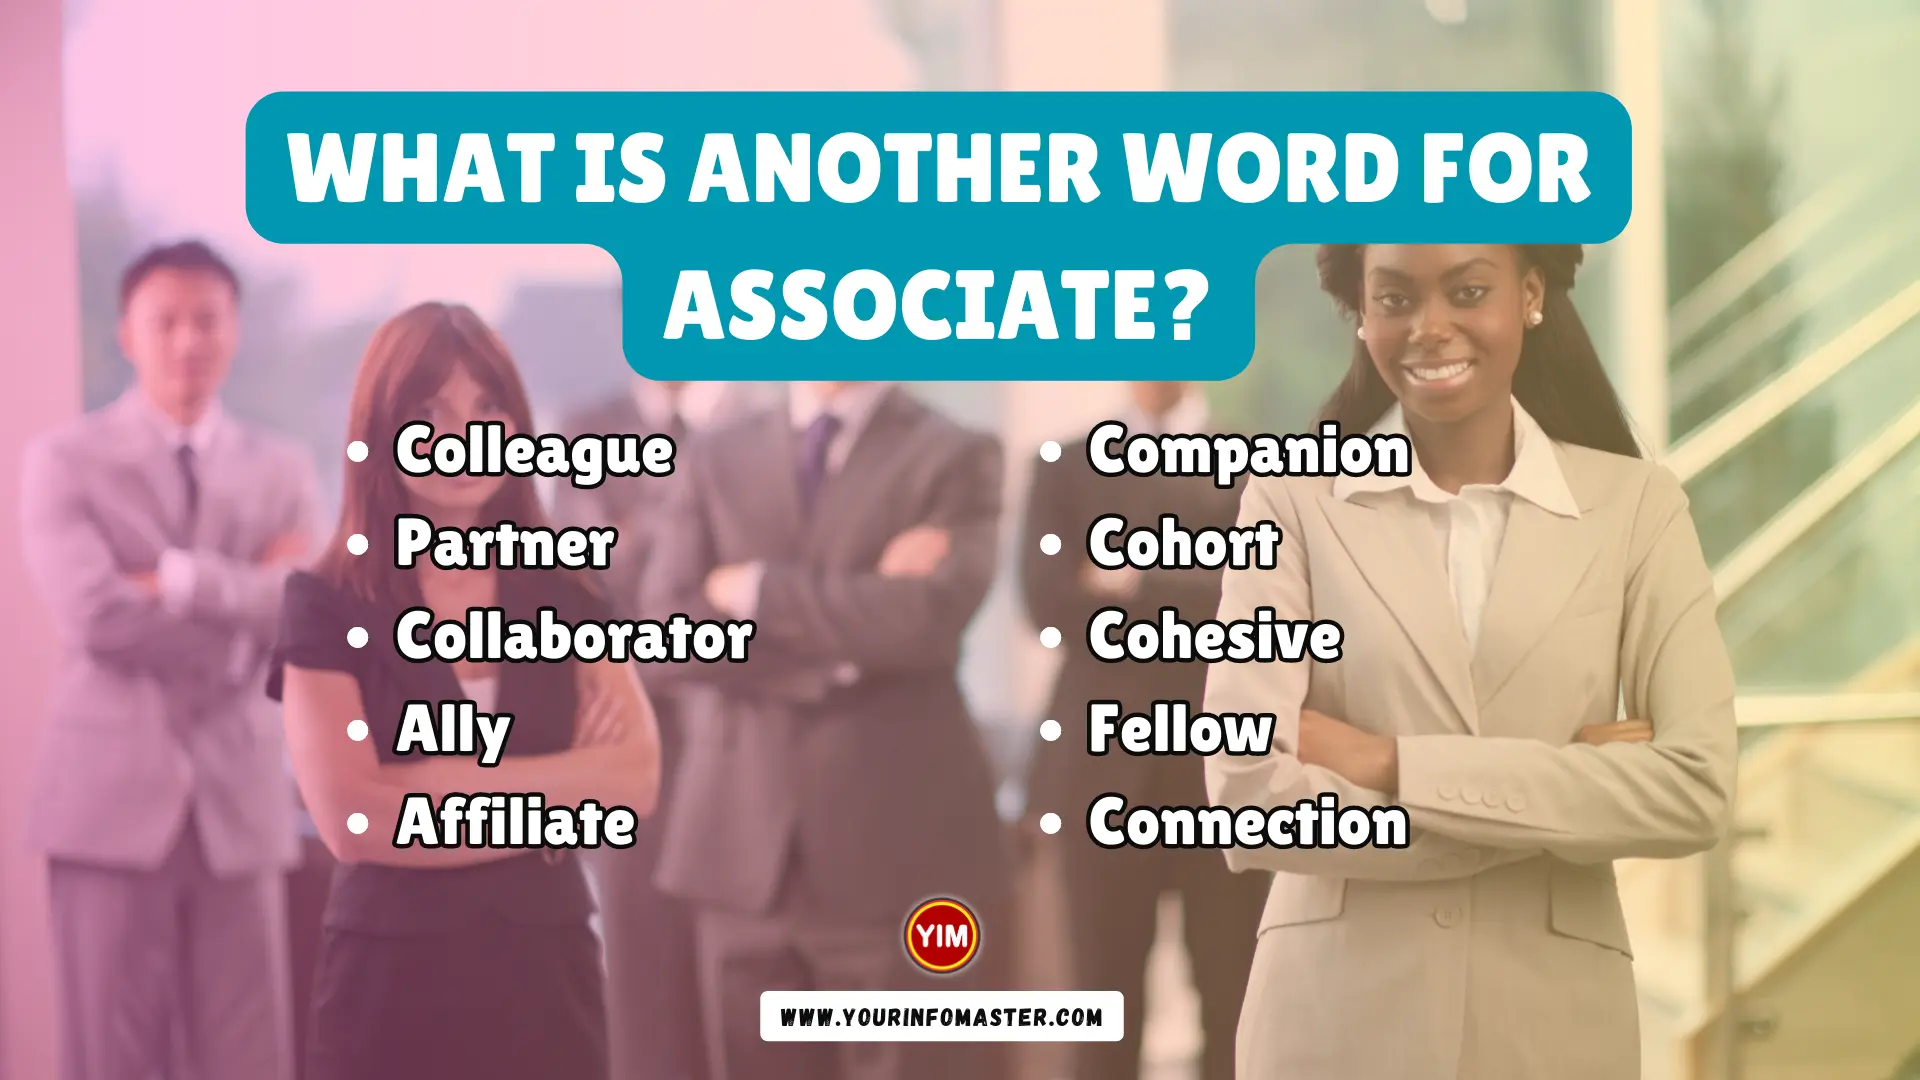 What is another word for Associate